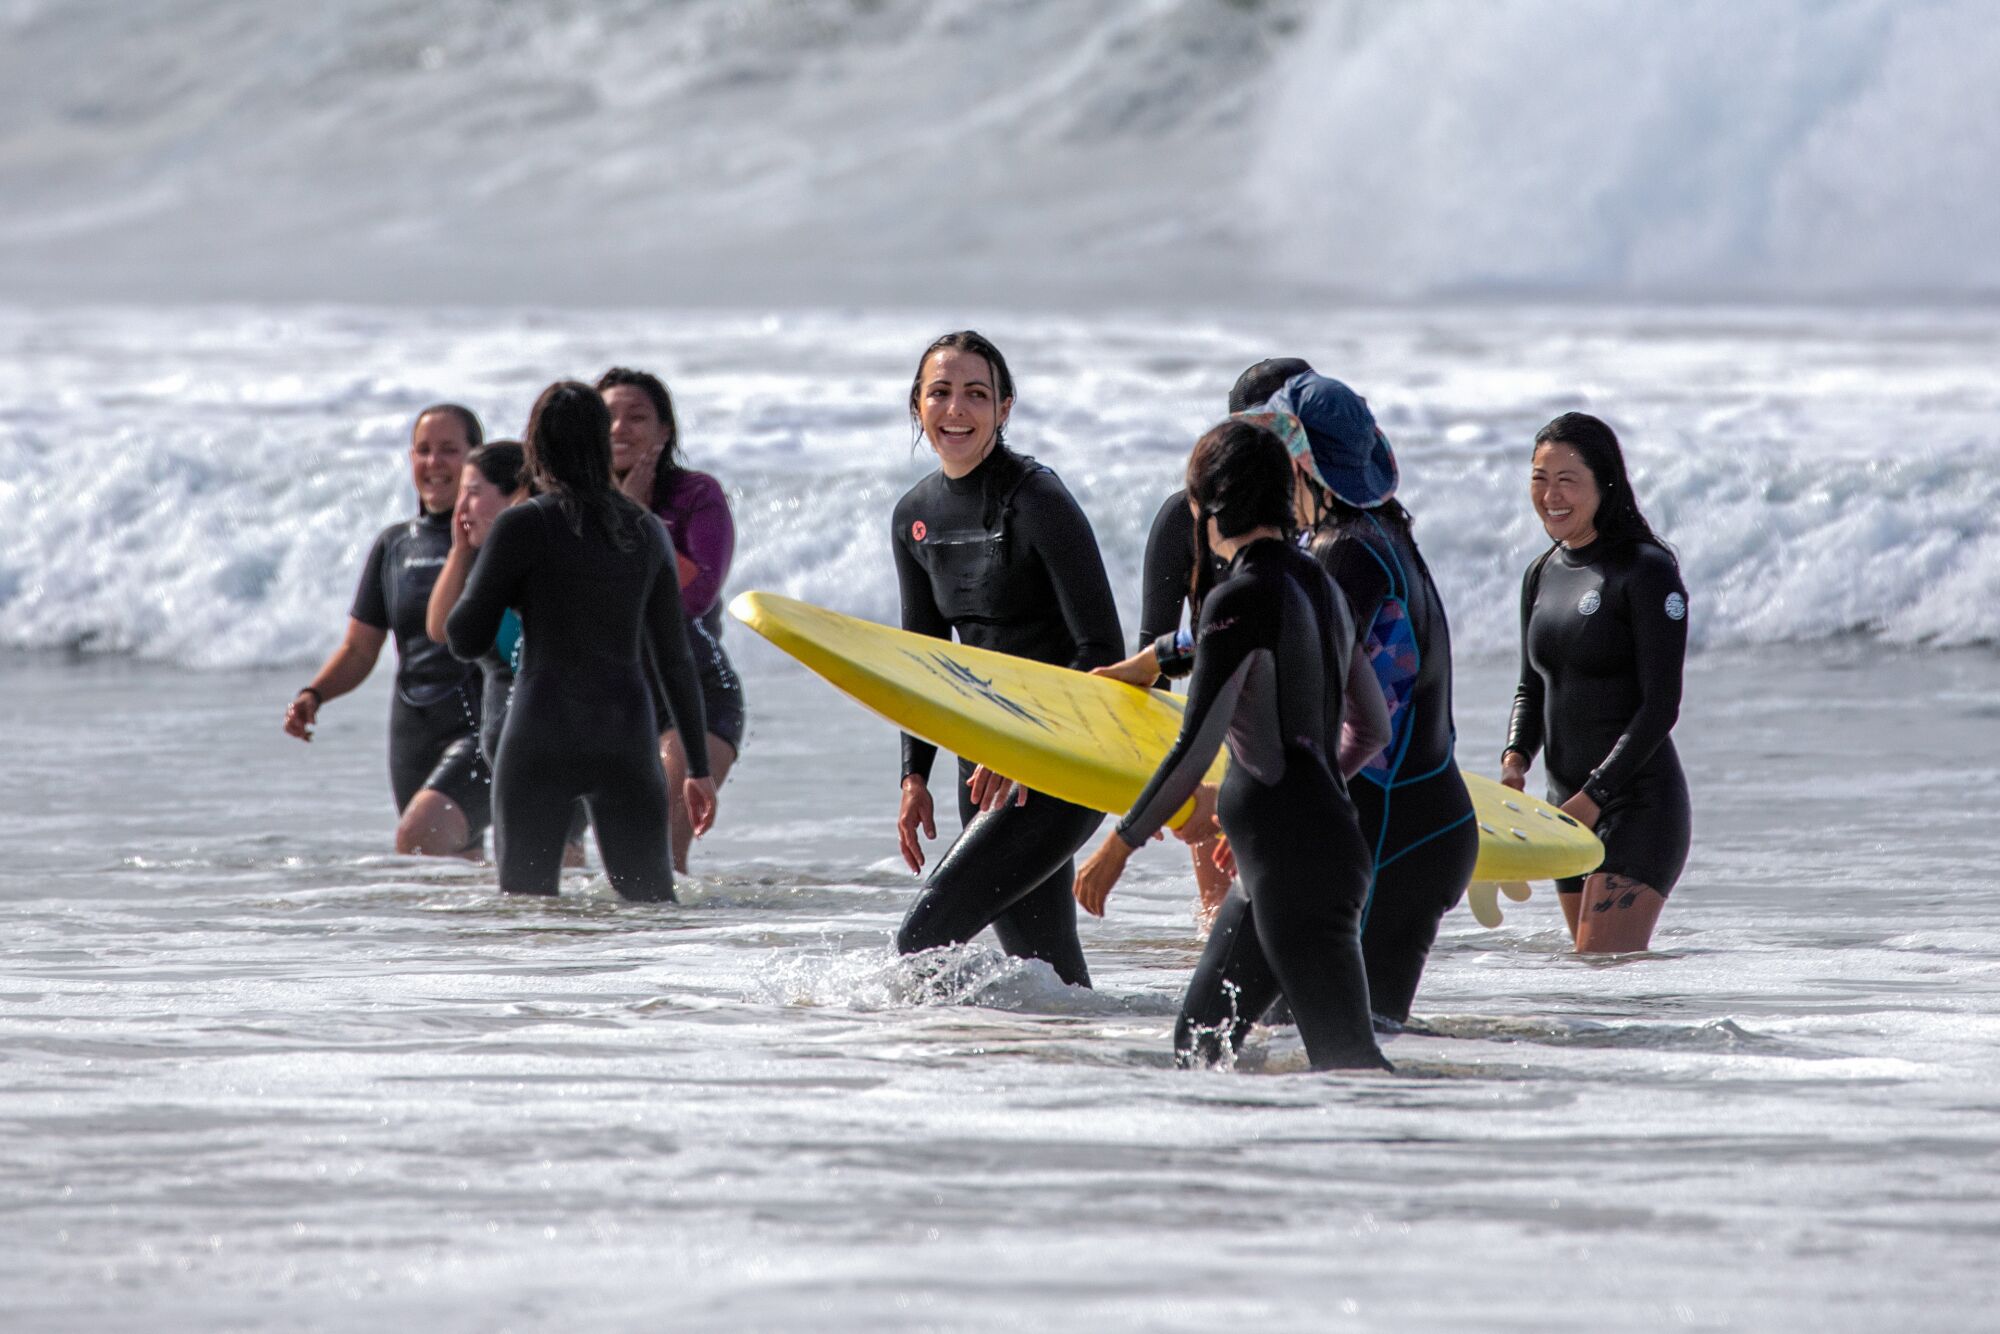 Women in wetsuits walk in shallow ocean water. One carries a yellow surfboard.